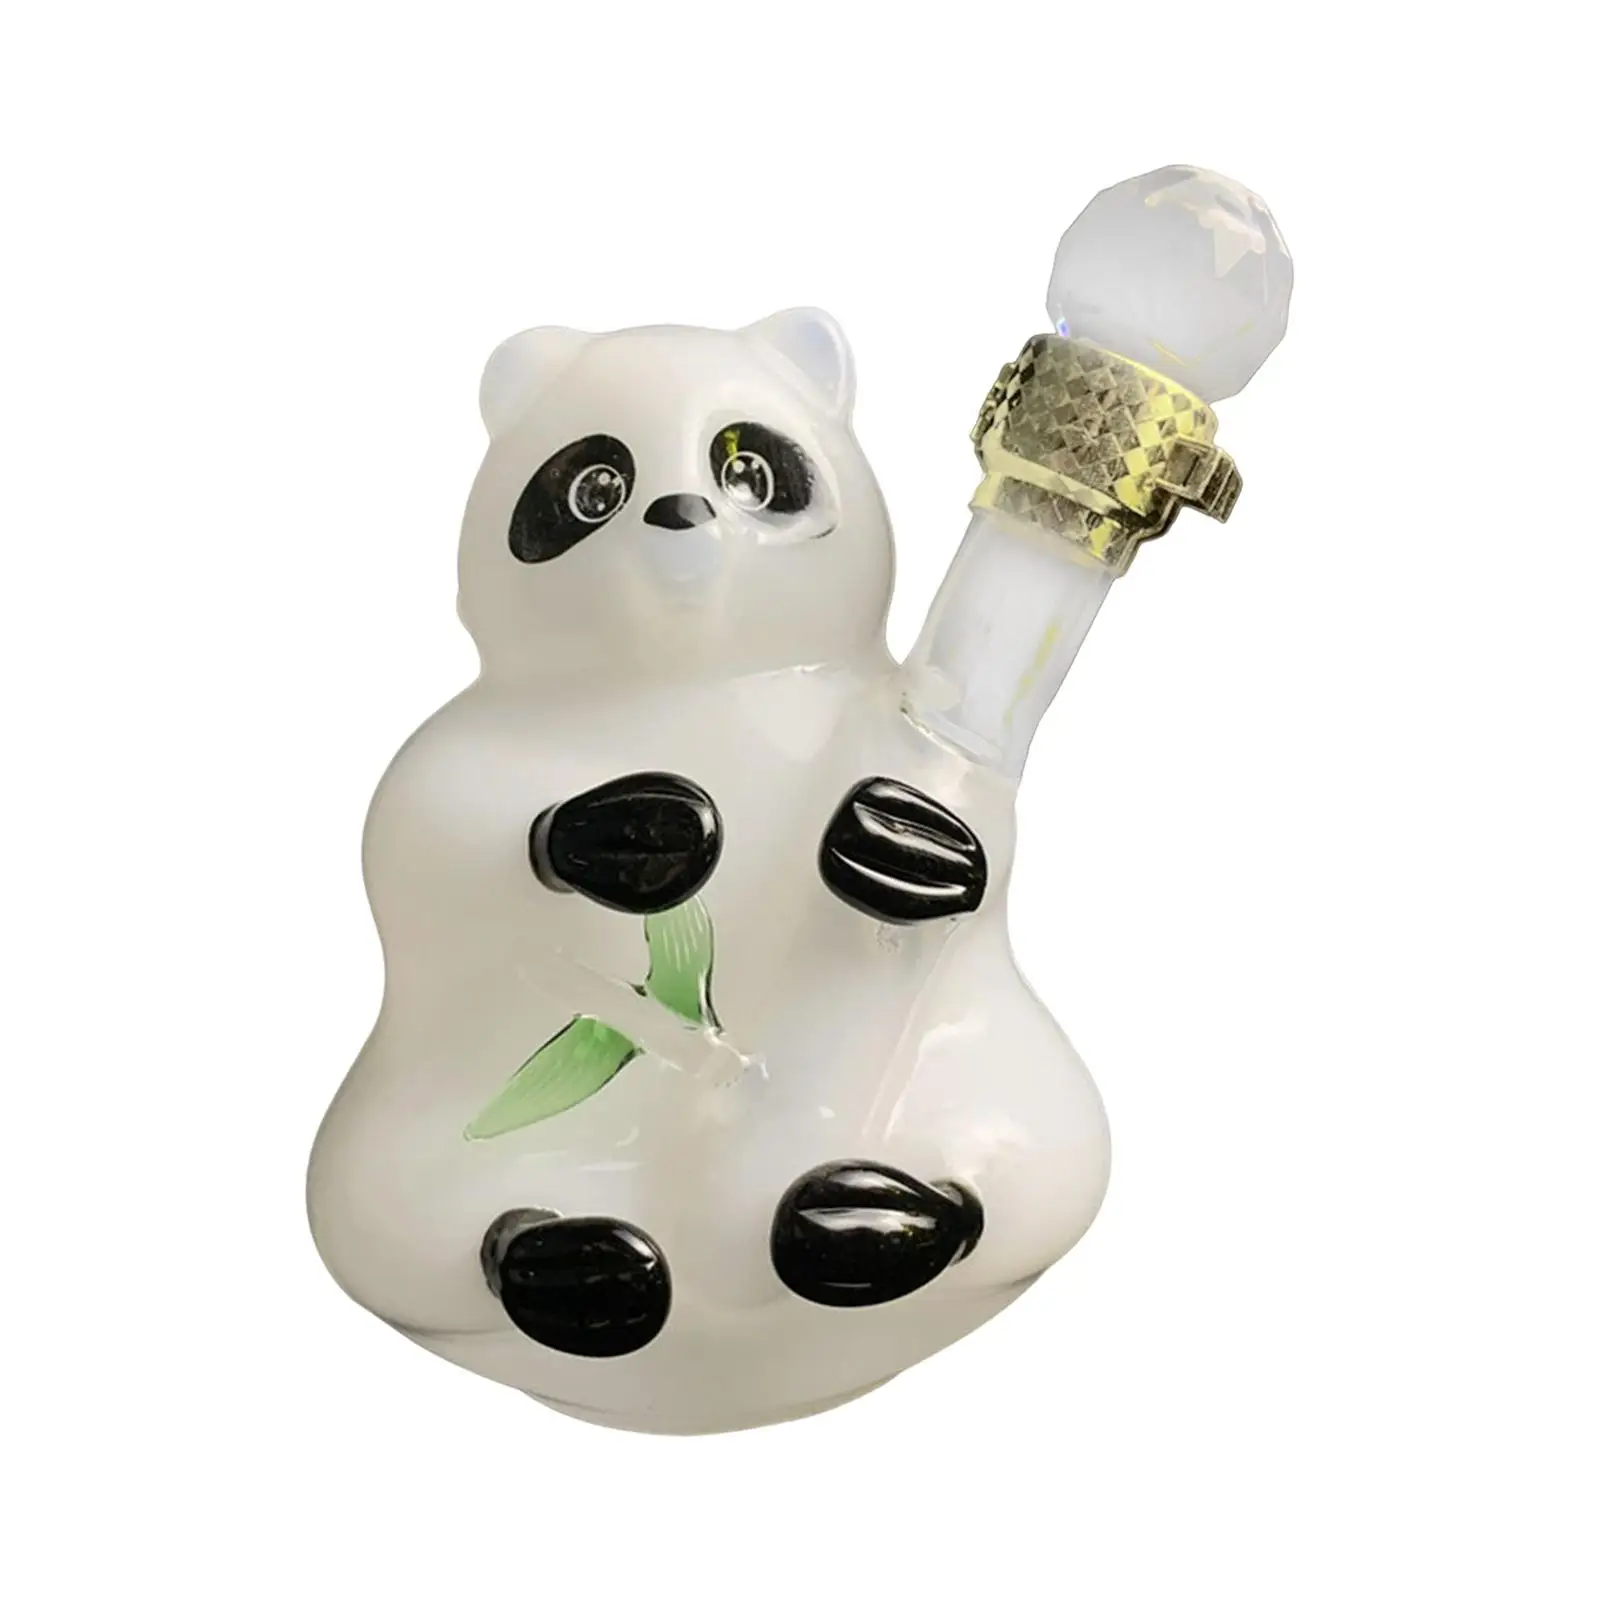 Panda Pattern Drinks Decanter Pitcher Carafe Dispenser Glass Aerator Pour Holder for Anniversary Kitchen Home Party Dining